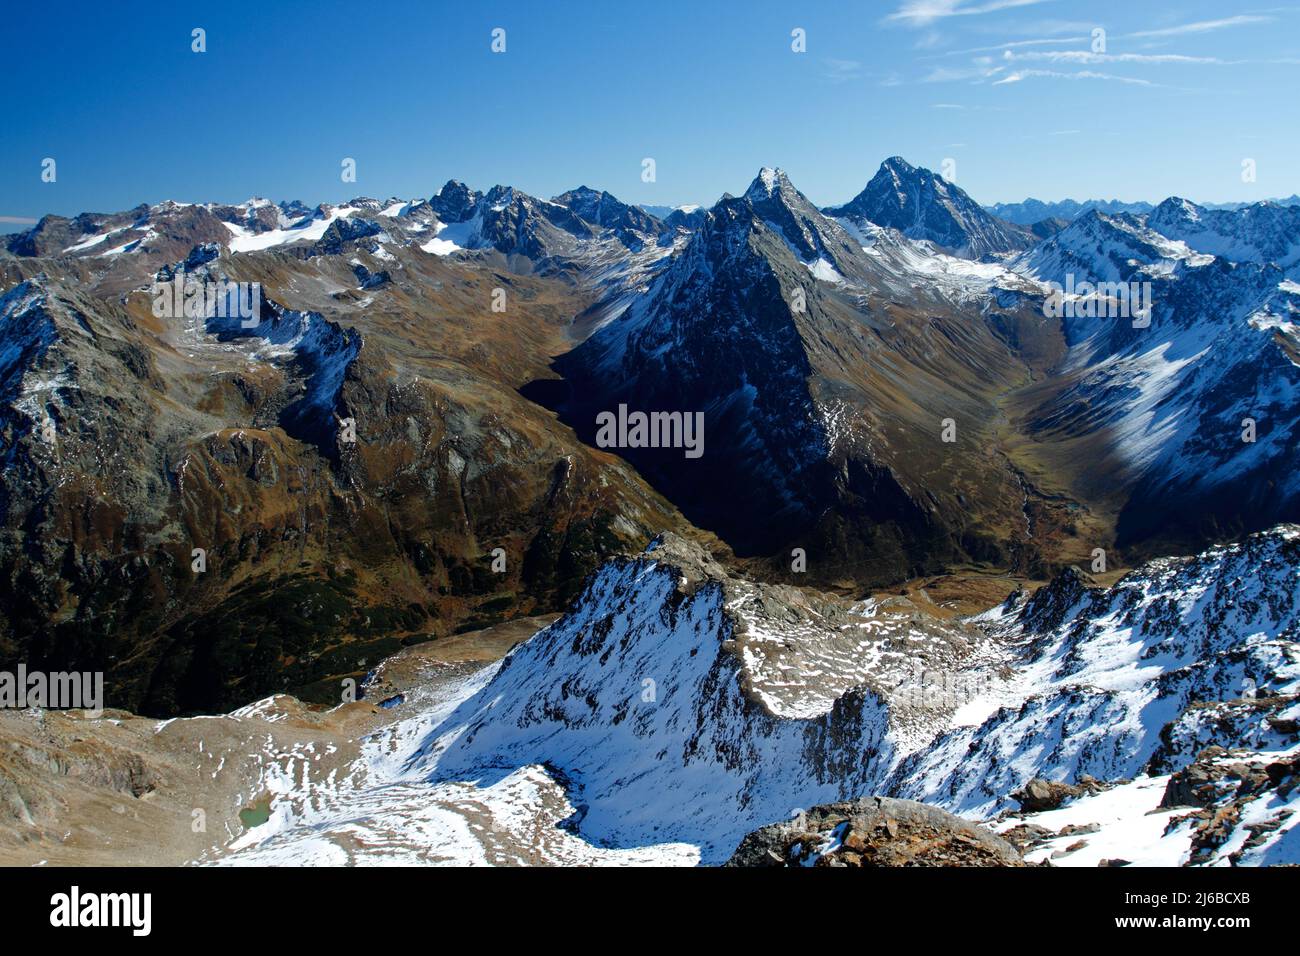 First touches of snow in the swiss Alps, Pischahorn, Switzerland Stock Photo